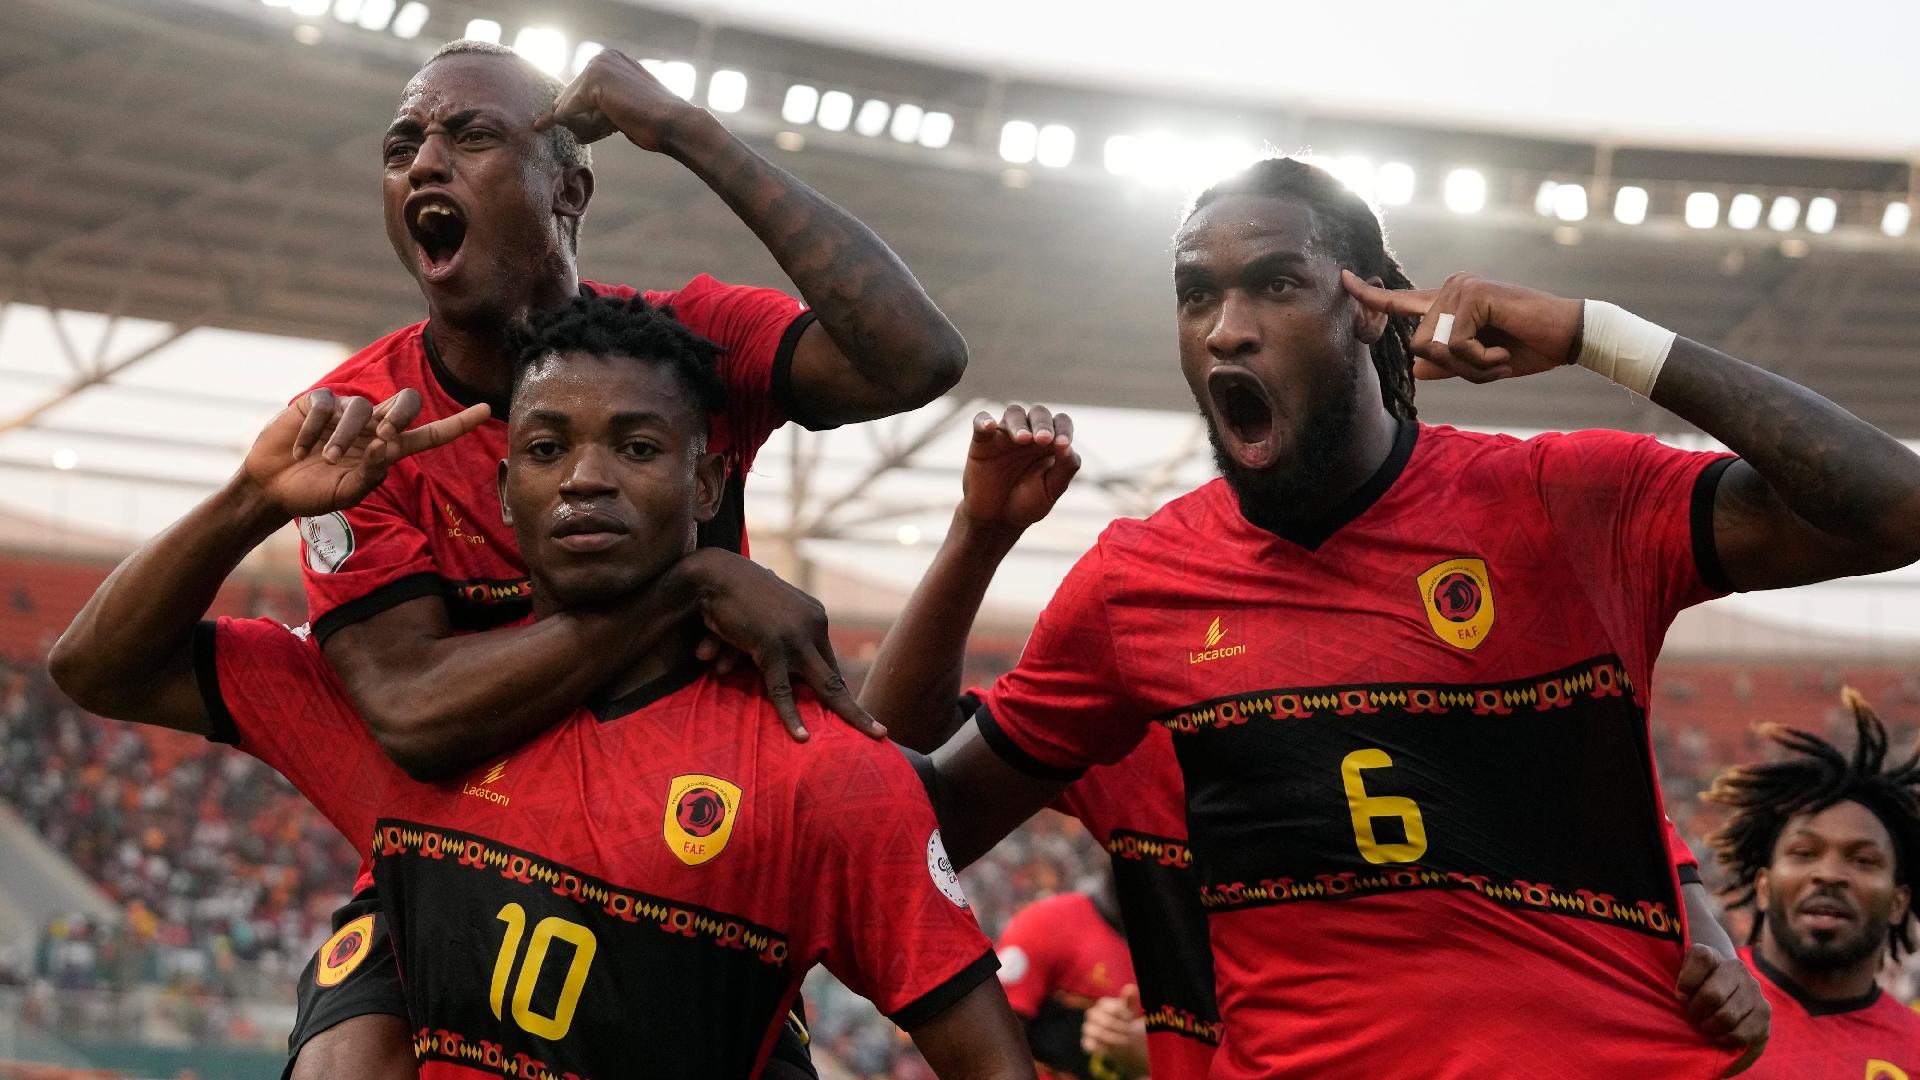 Angola beats Namibia after wild first half drama | beIN SPORTS